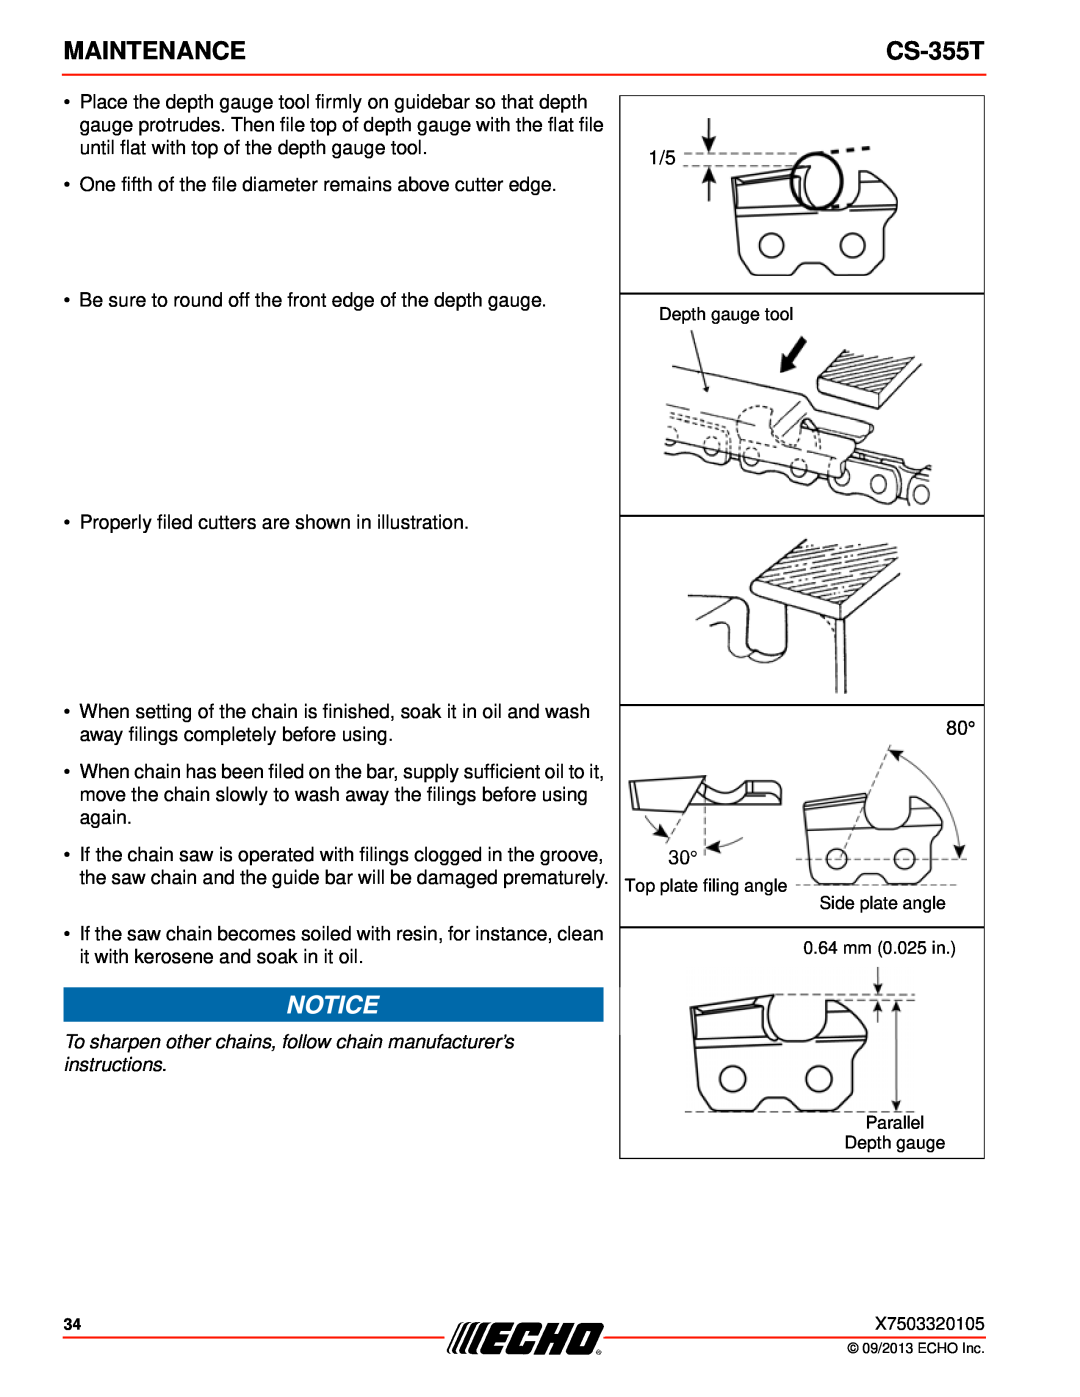 Echo CS-355T instruction manual To sharpen other chains, follow chain manufacturer’s instructions, Maintenance 